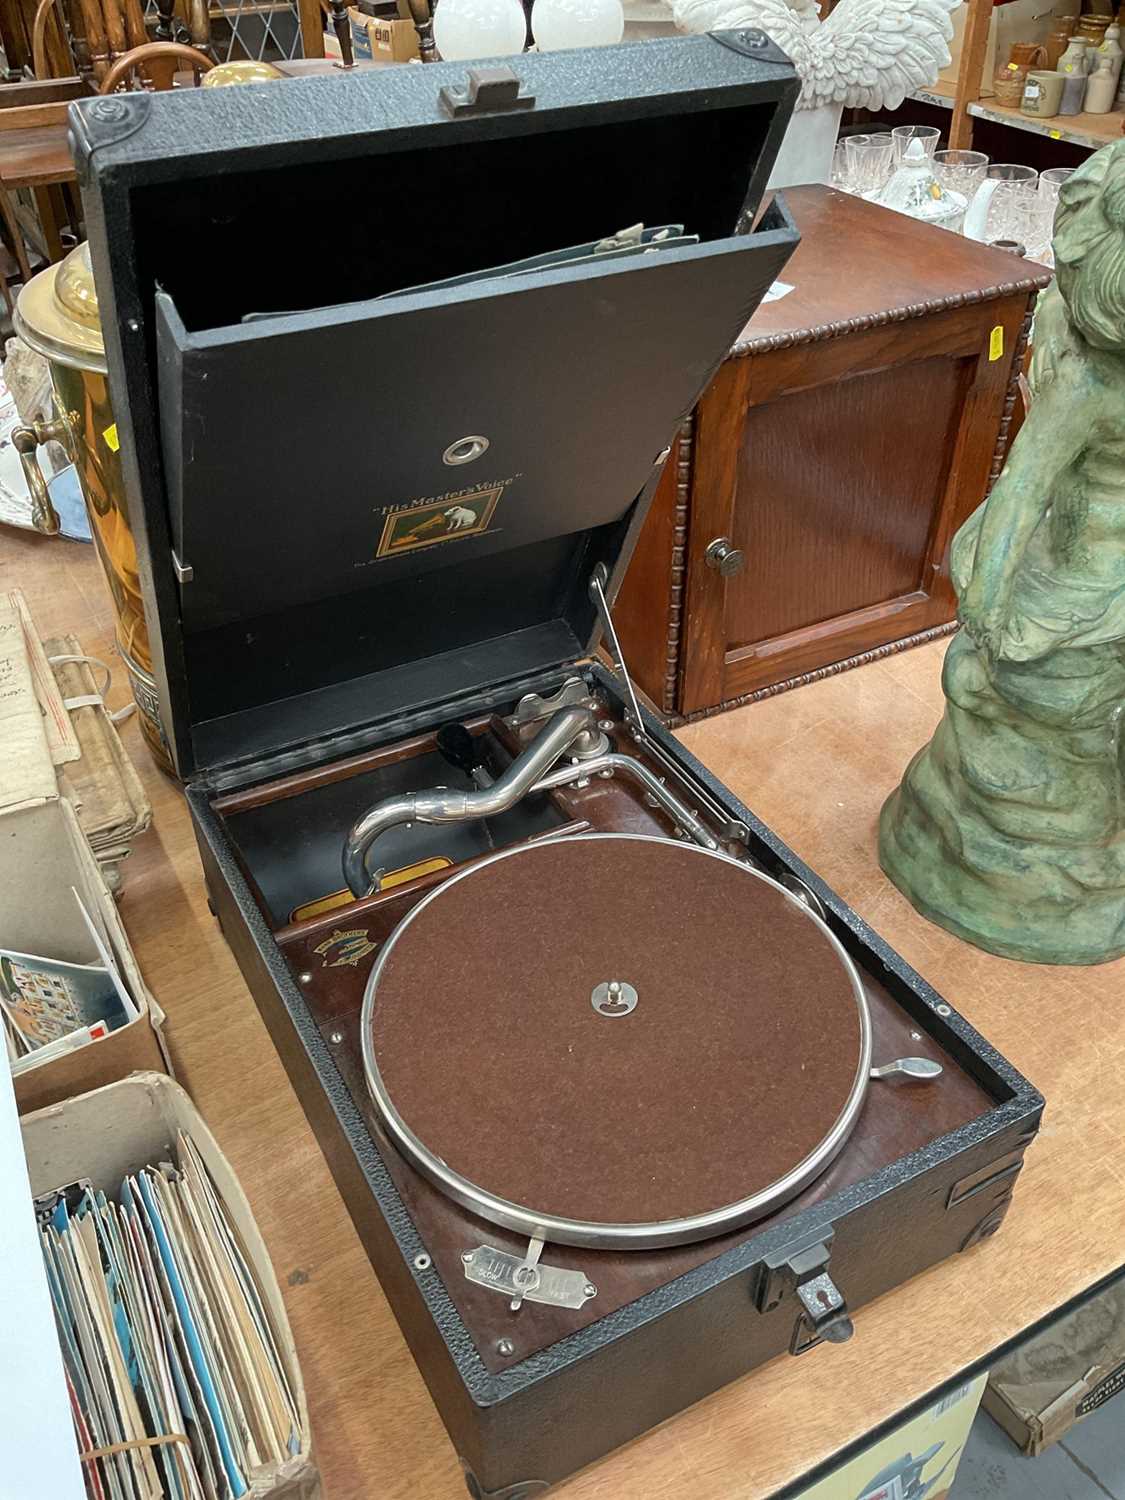 His Master's Voice portable record player